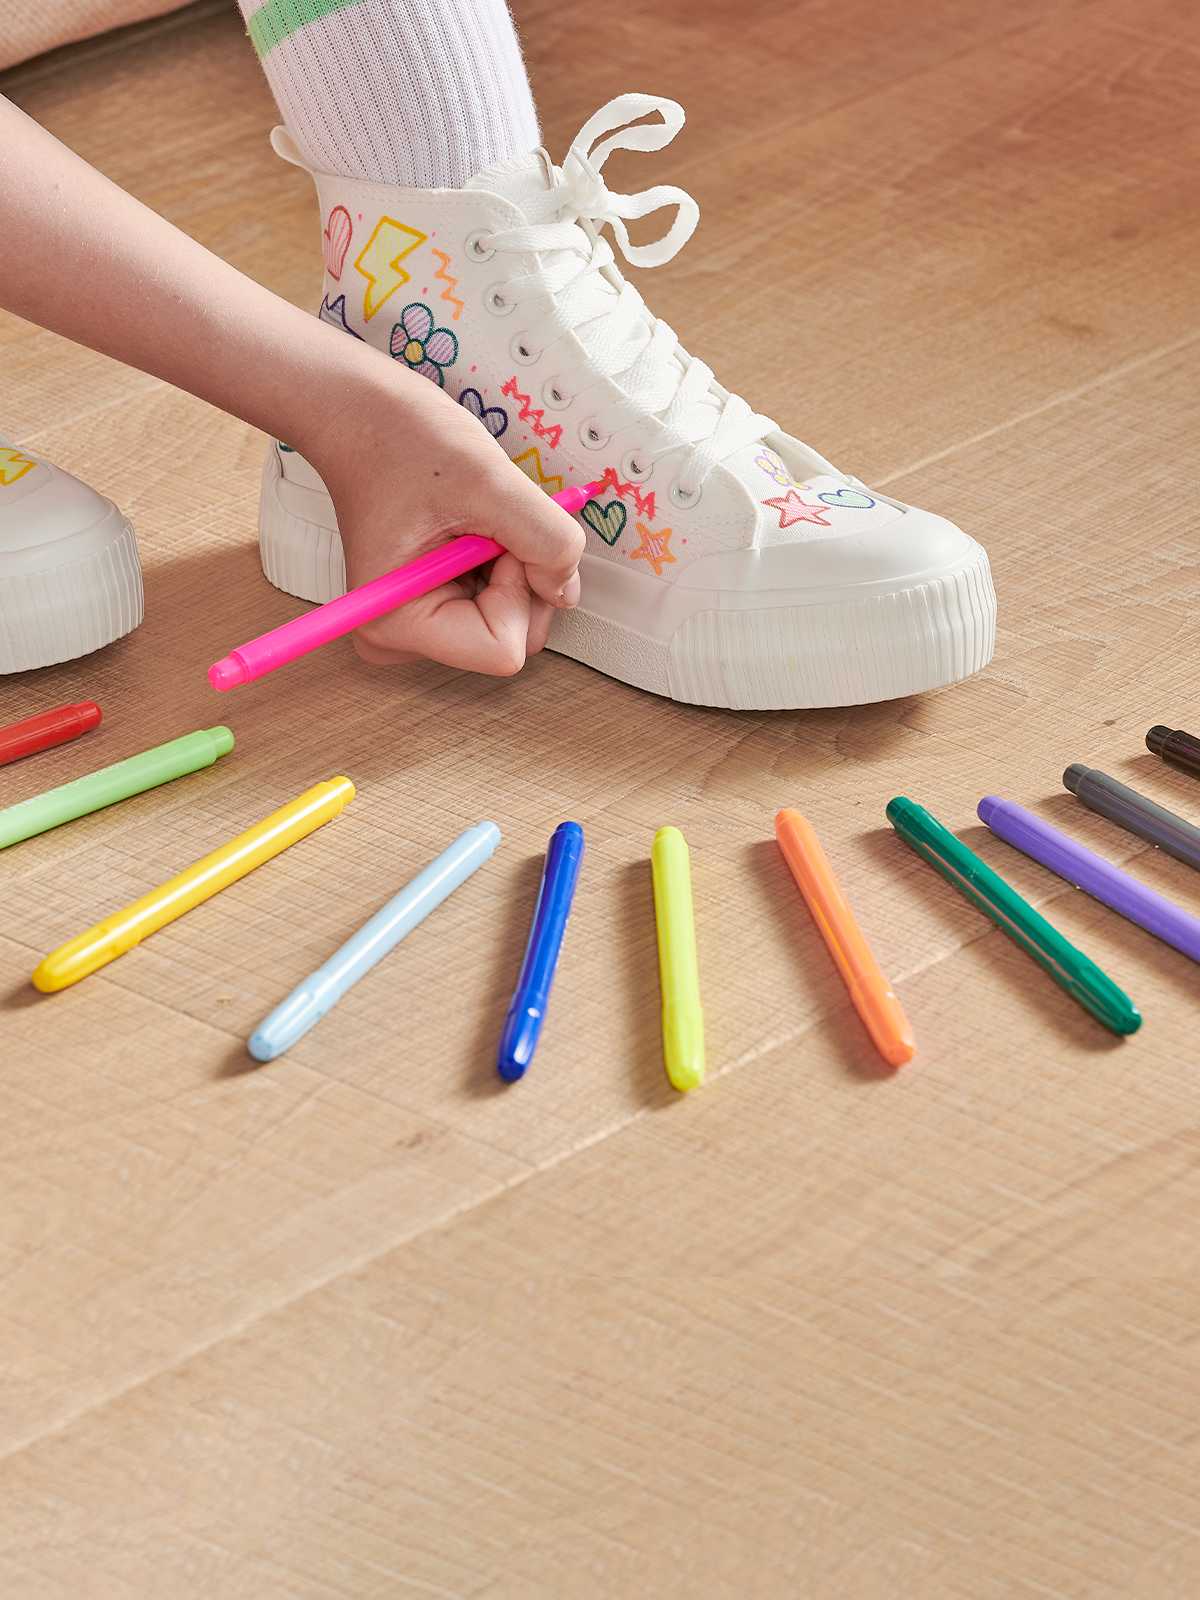 Ooly Kids Stationery - Rainbow Sparkle Glitter Markers – The Little Kidz  Closet